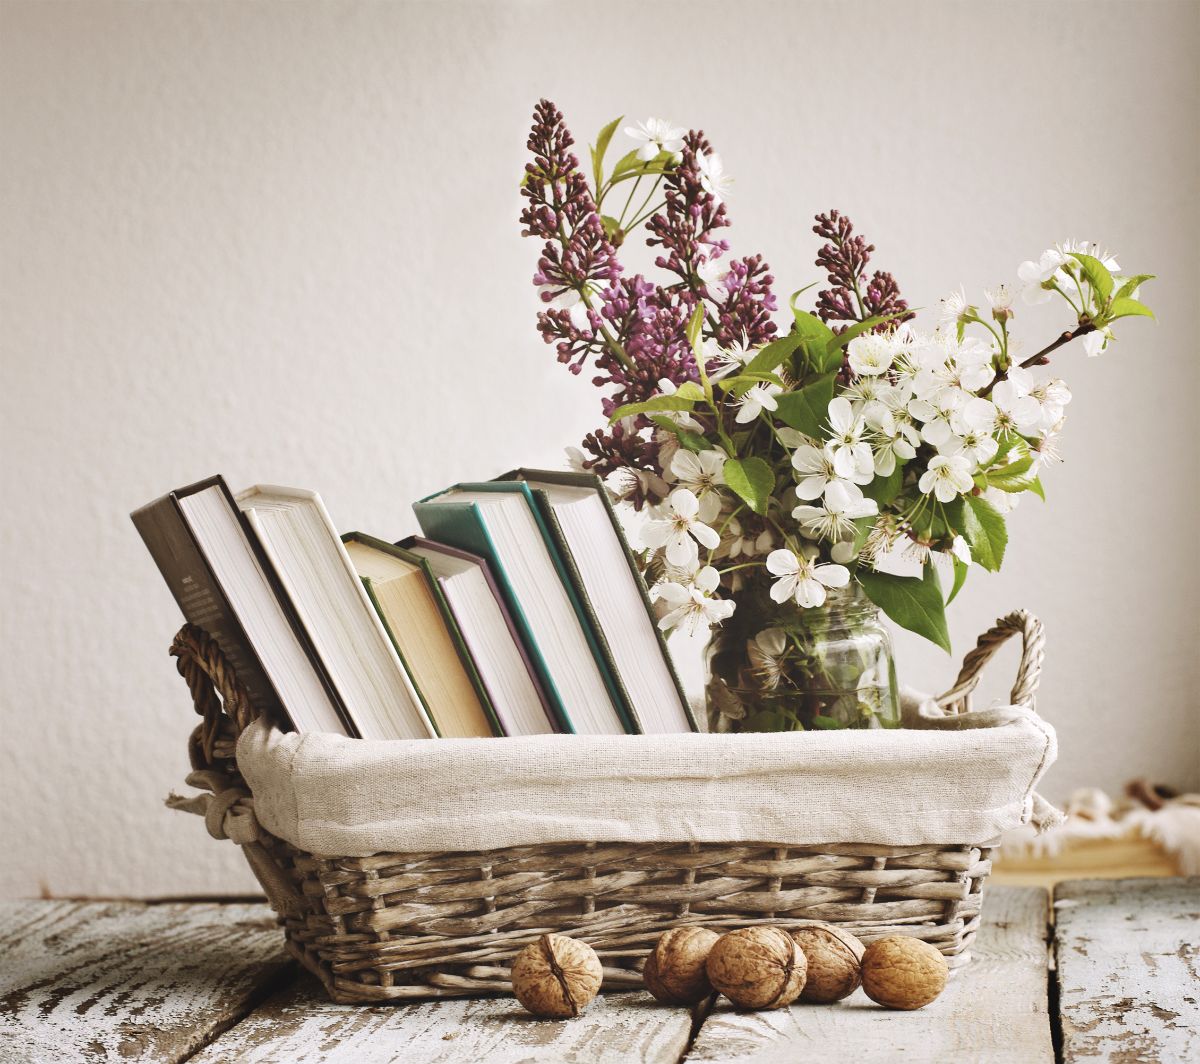 A basket with gardening books and natural plants